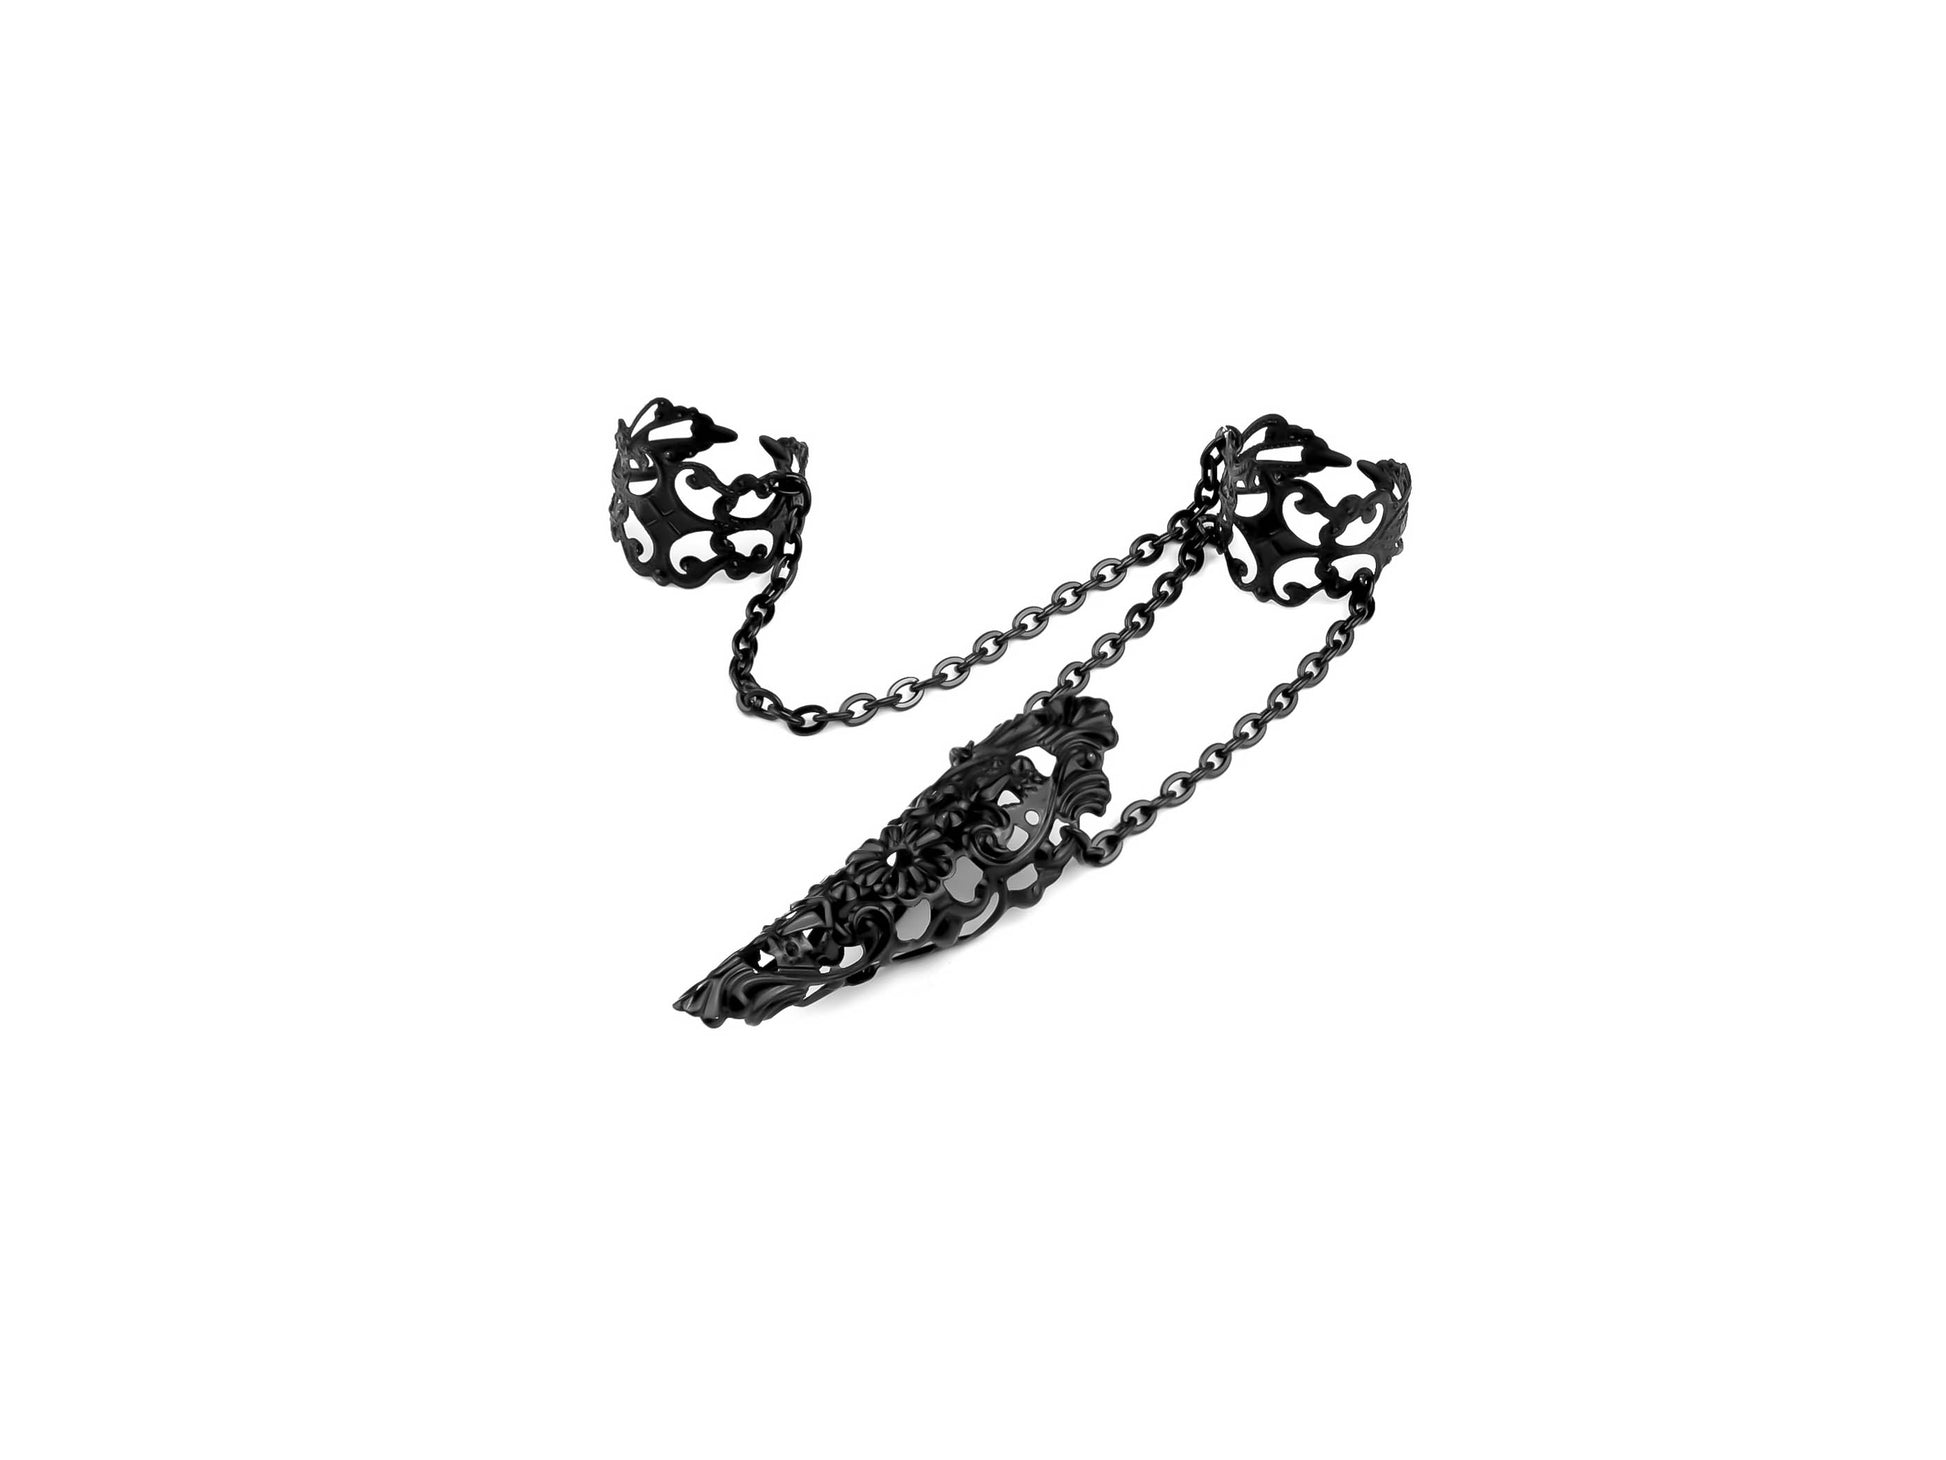  A striking black double ring with a claw design by Myril Jewels, set against a white background, evokes the dark-avantgarde spirit of neo-goth jewelry. The rings are connected by a sleek chain, featuring elaborate filigree work that encapsulates a gothic-chic aesthetic. Ideal for Halloween, this bold accessory complements a witchcore or whimsigoth wardrobe, and adds a daring touch to minimal goth, everyday wear, or as an edgy highlight for rave party and festival jewels.